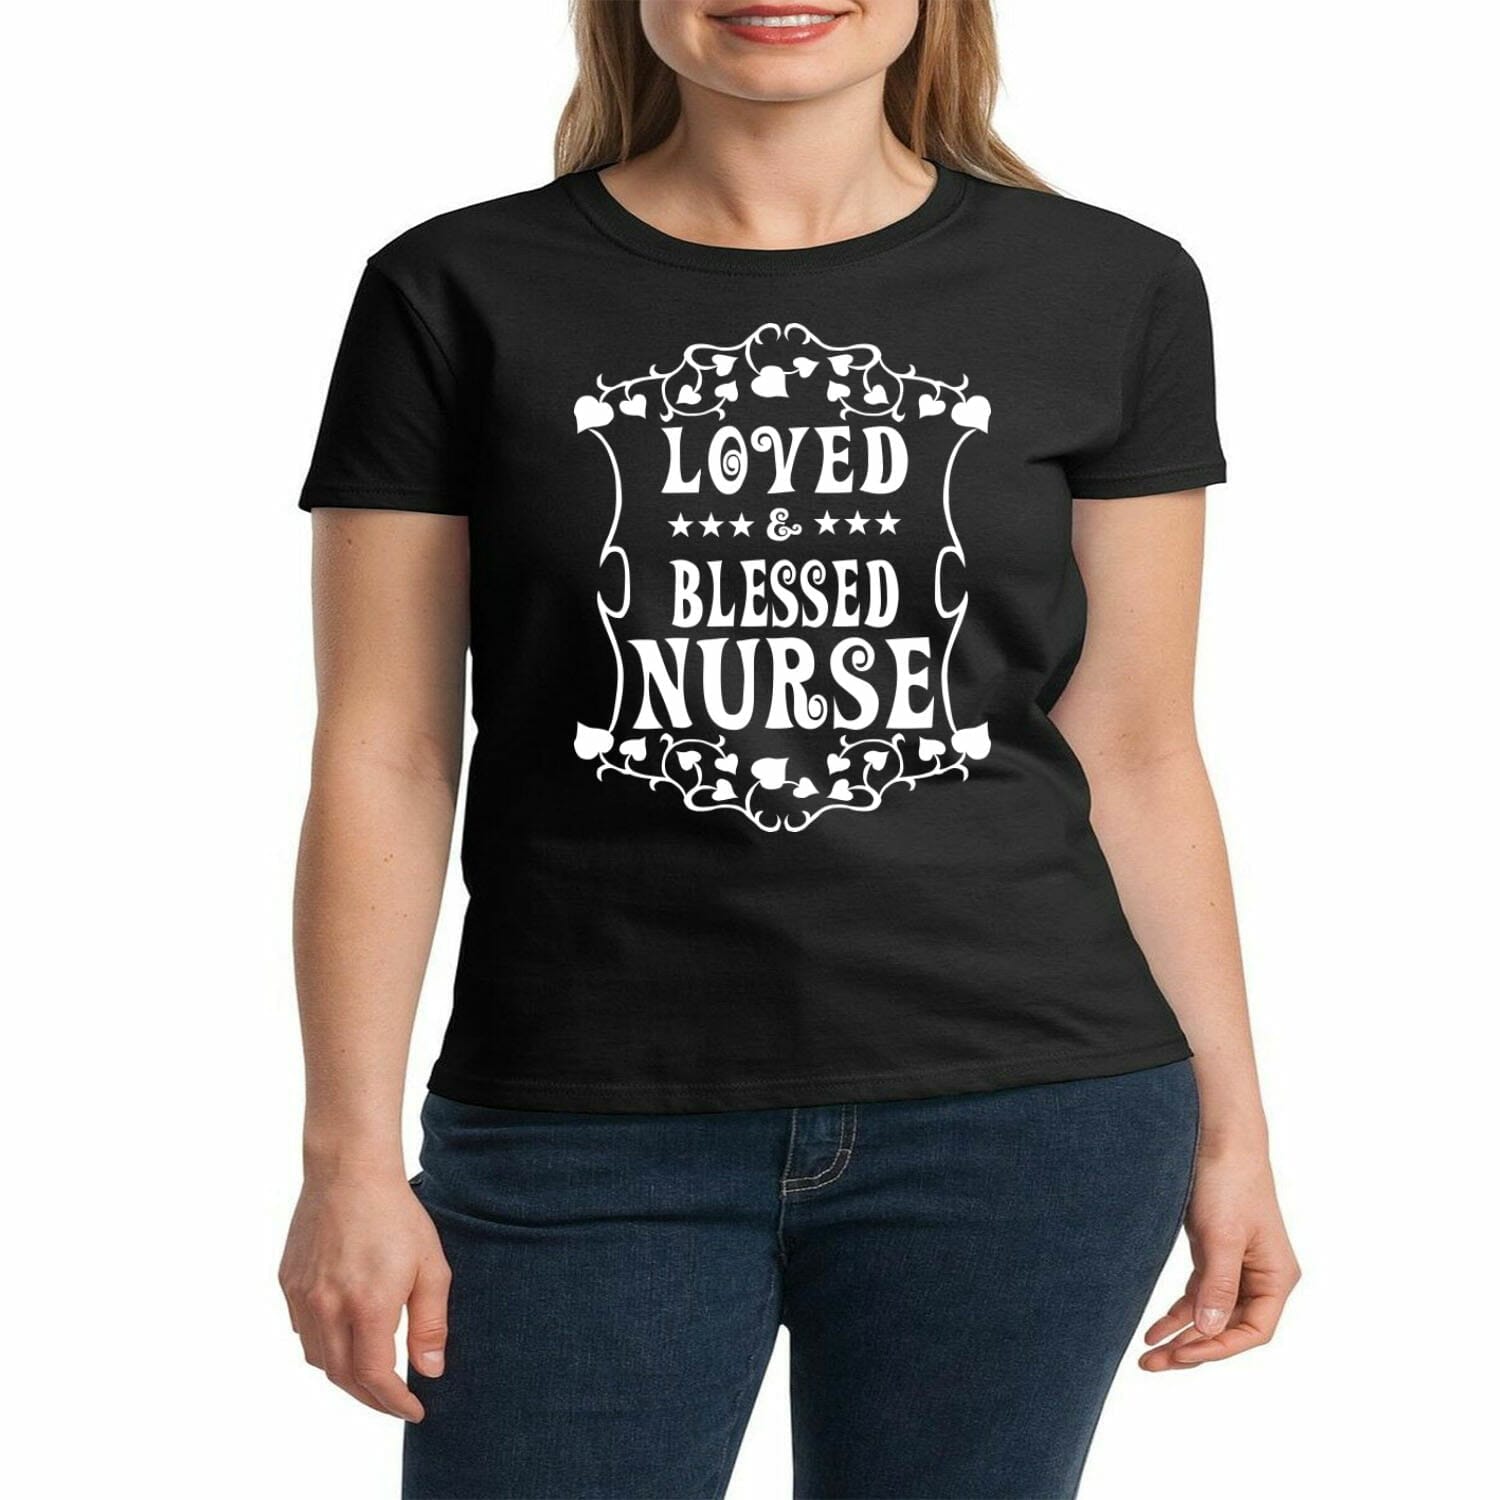 loved and blessed nurse tshirt design